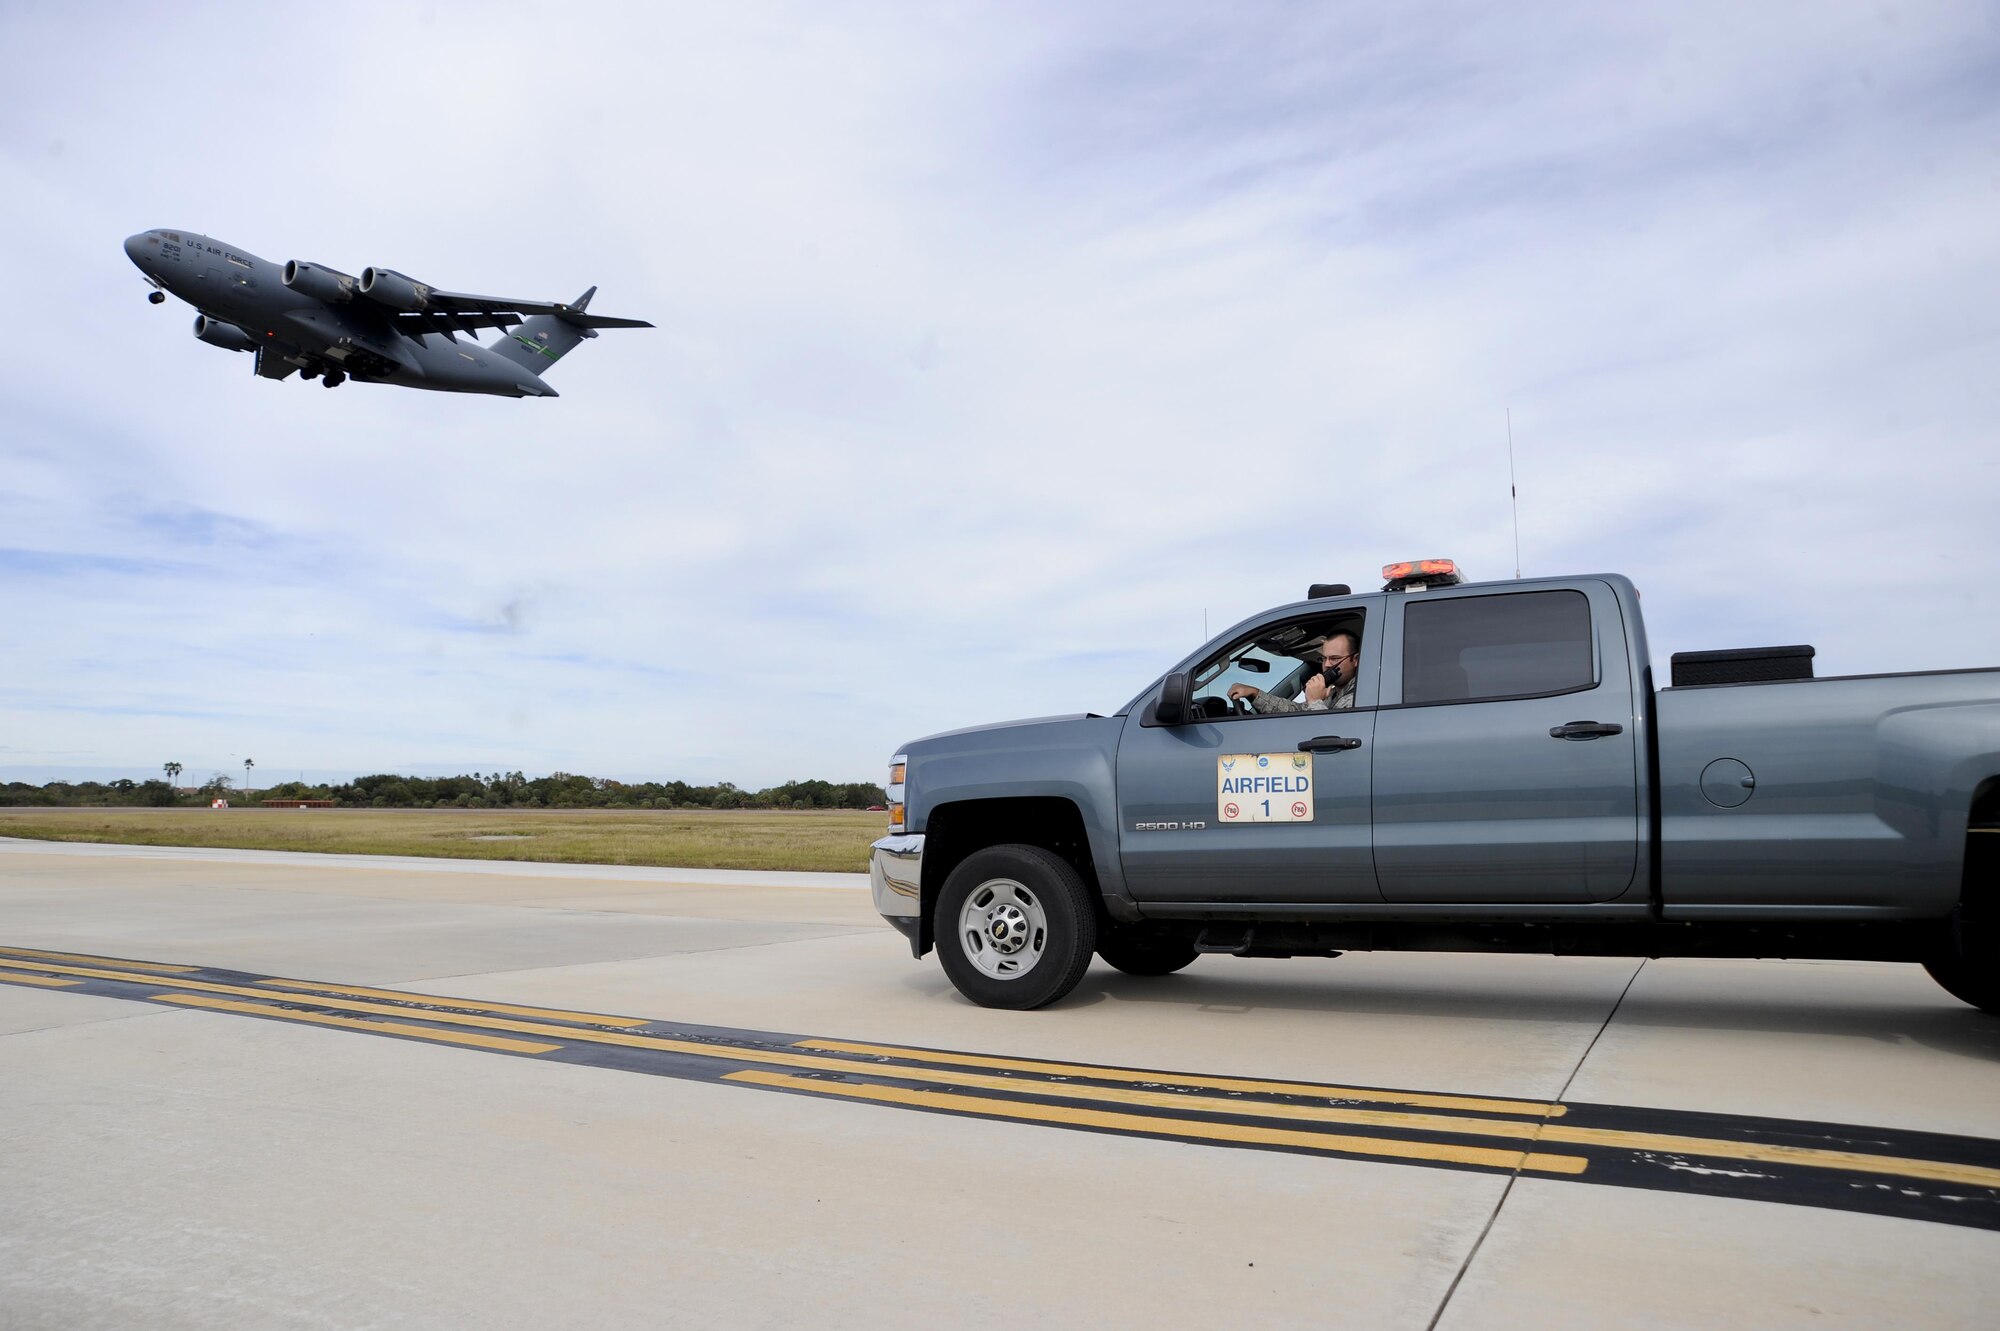 Staff Sgt. Michael David, an airfield management operations supervisor with the 6th Operations Support Squadron, waits for the air traffic control tower to clear him onto the airfield at MacDill Air Force Base, Fla., Jan. 22, 2016. Airfield management Airmen are responsible for performing multiple daily airfield checks to ensure it’s safe for aircraft. (U.S. Air Force photo/Airman 1st Class Mariette M. Adams)